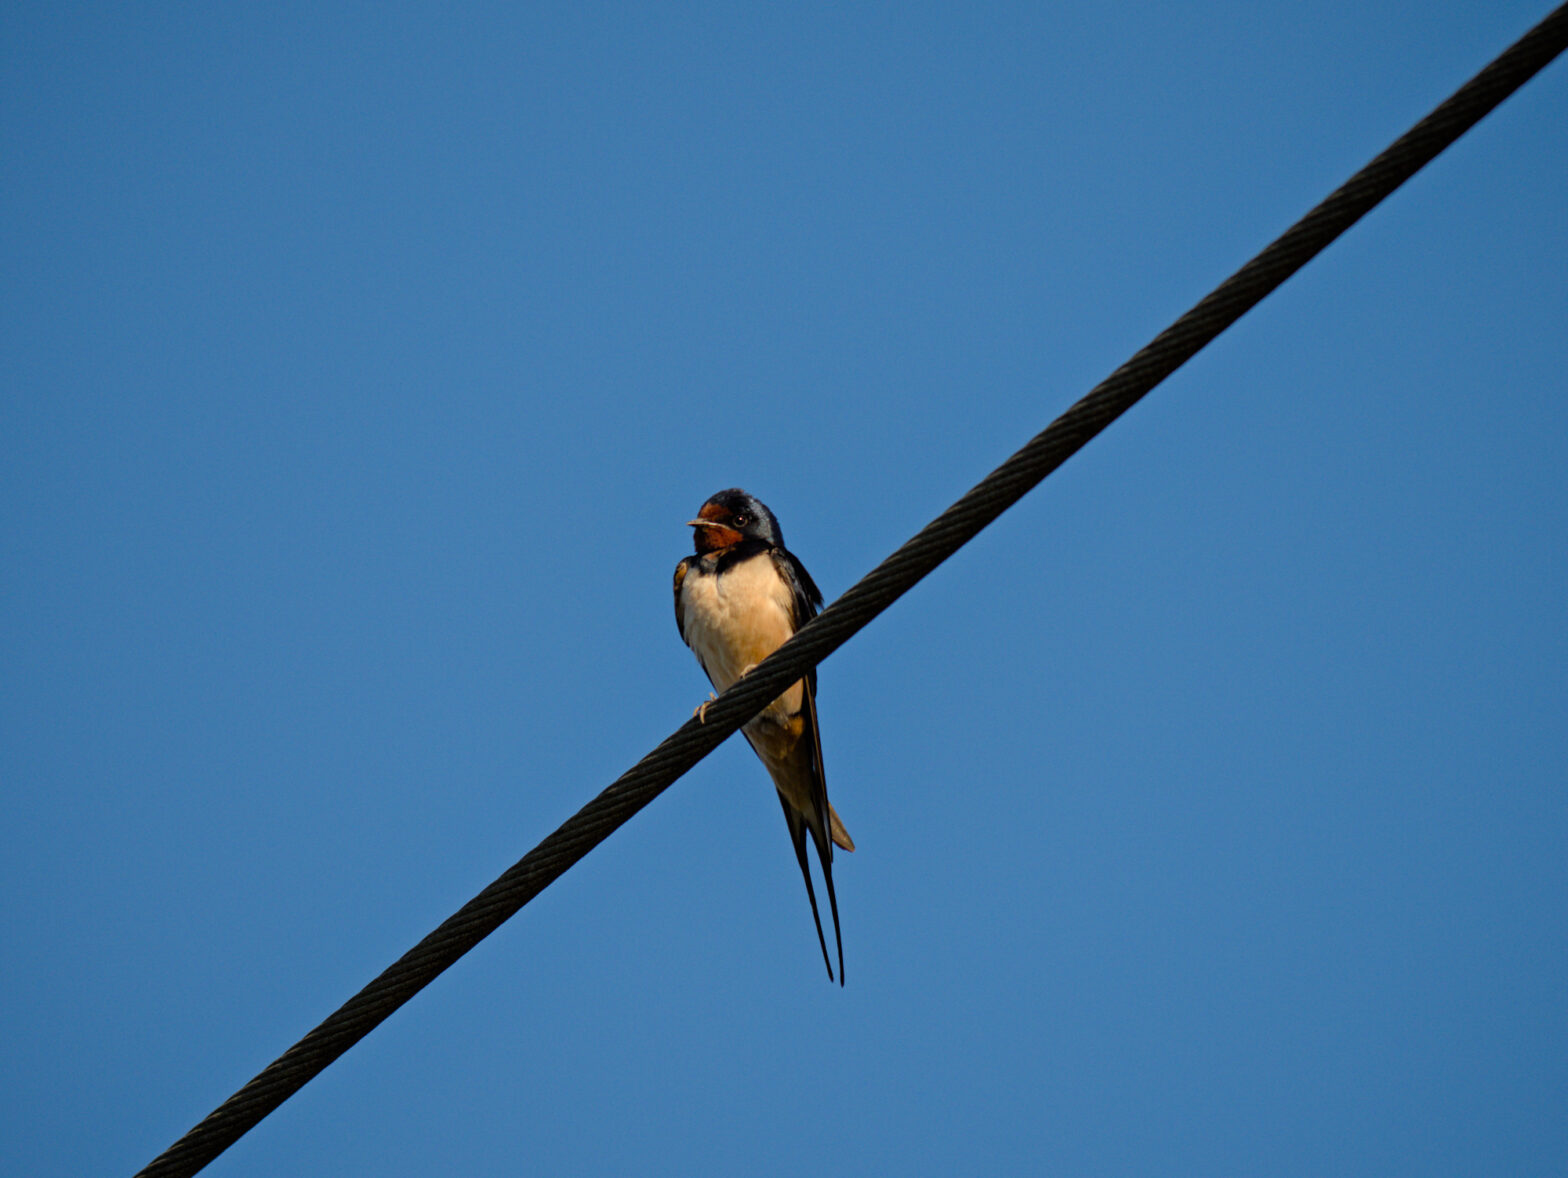 A barn swallow perches on a power line